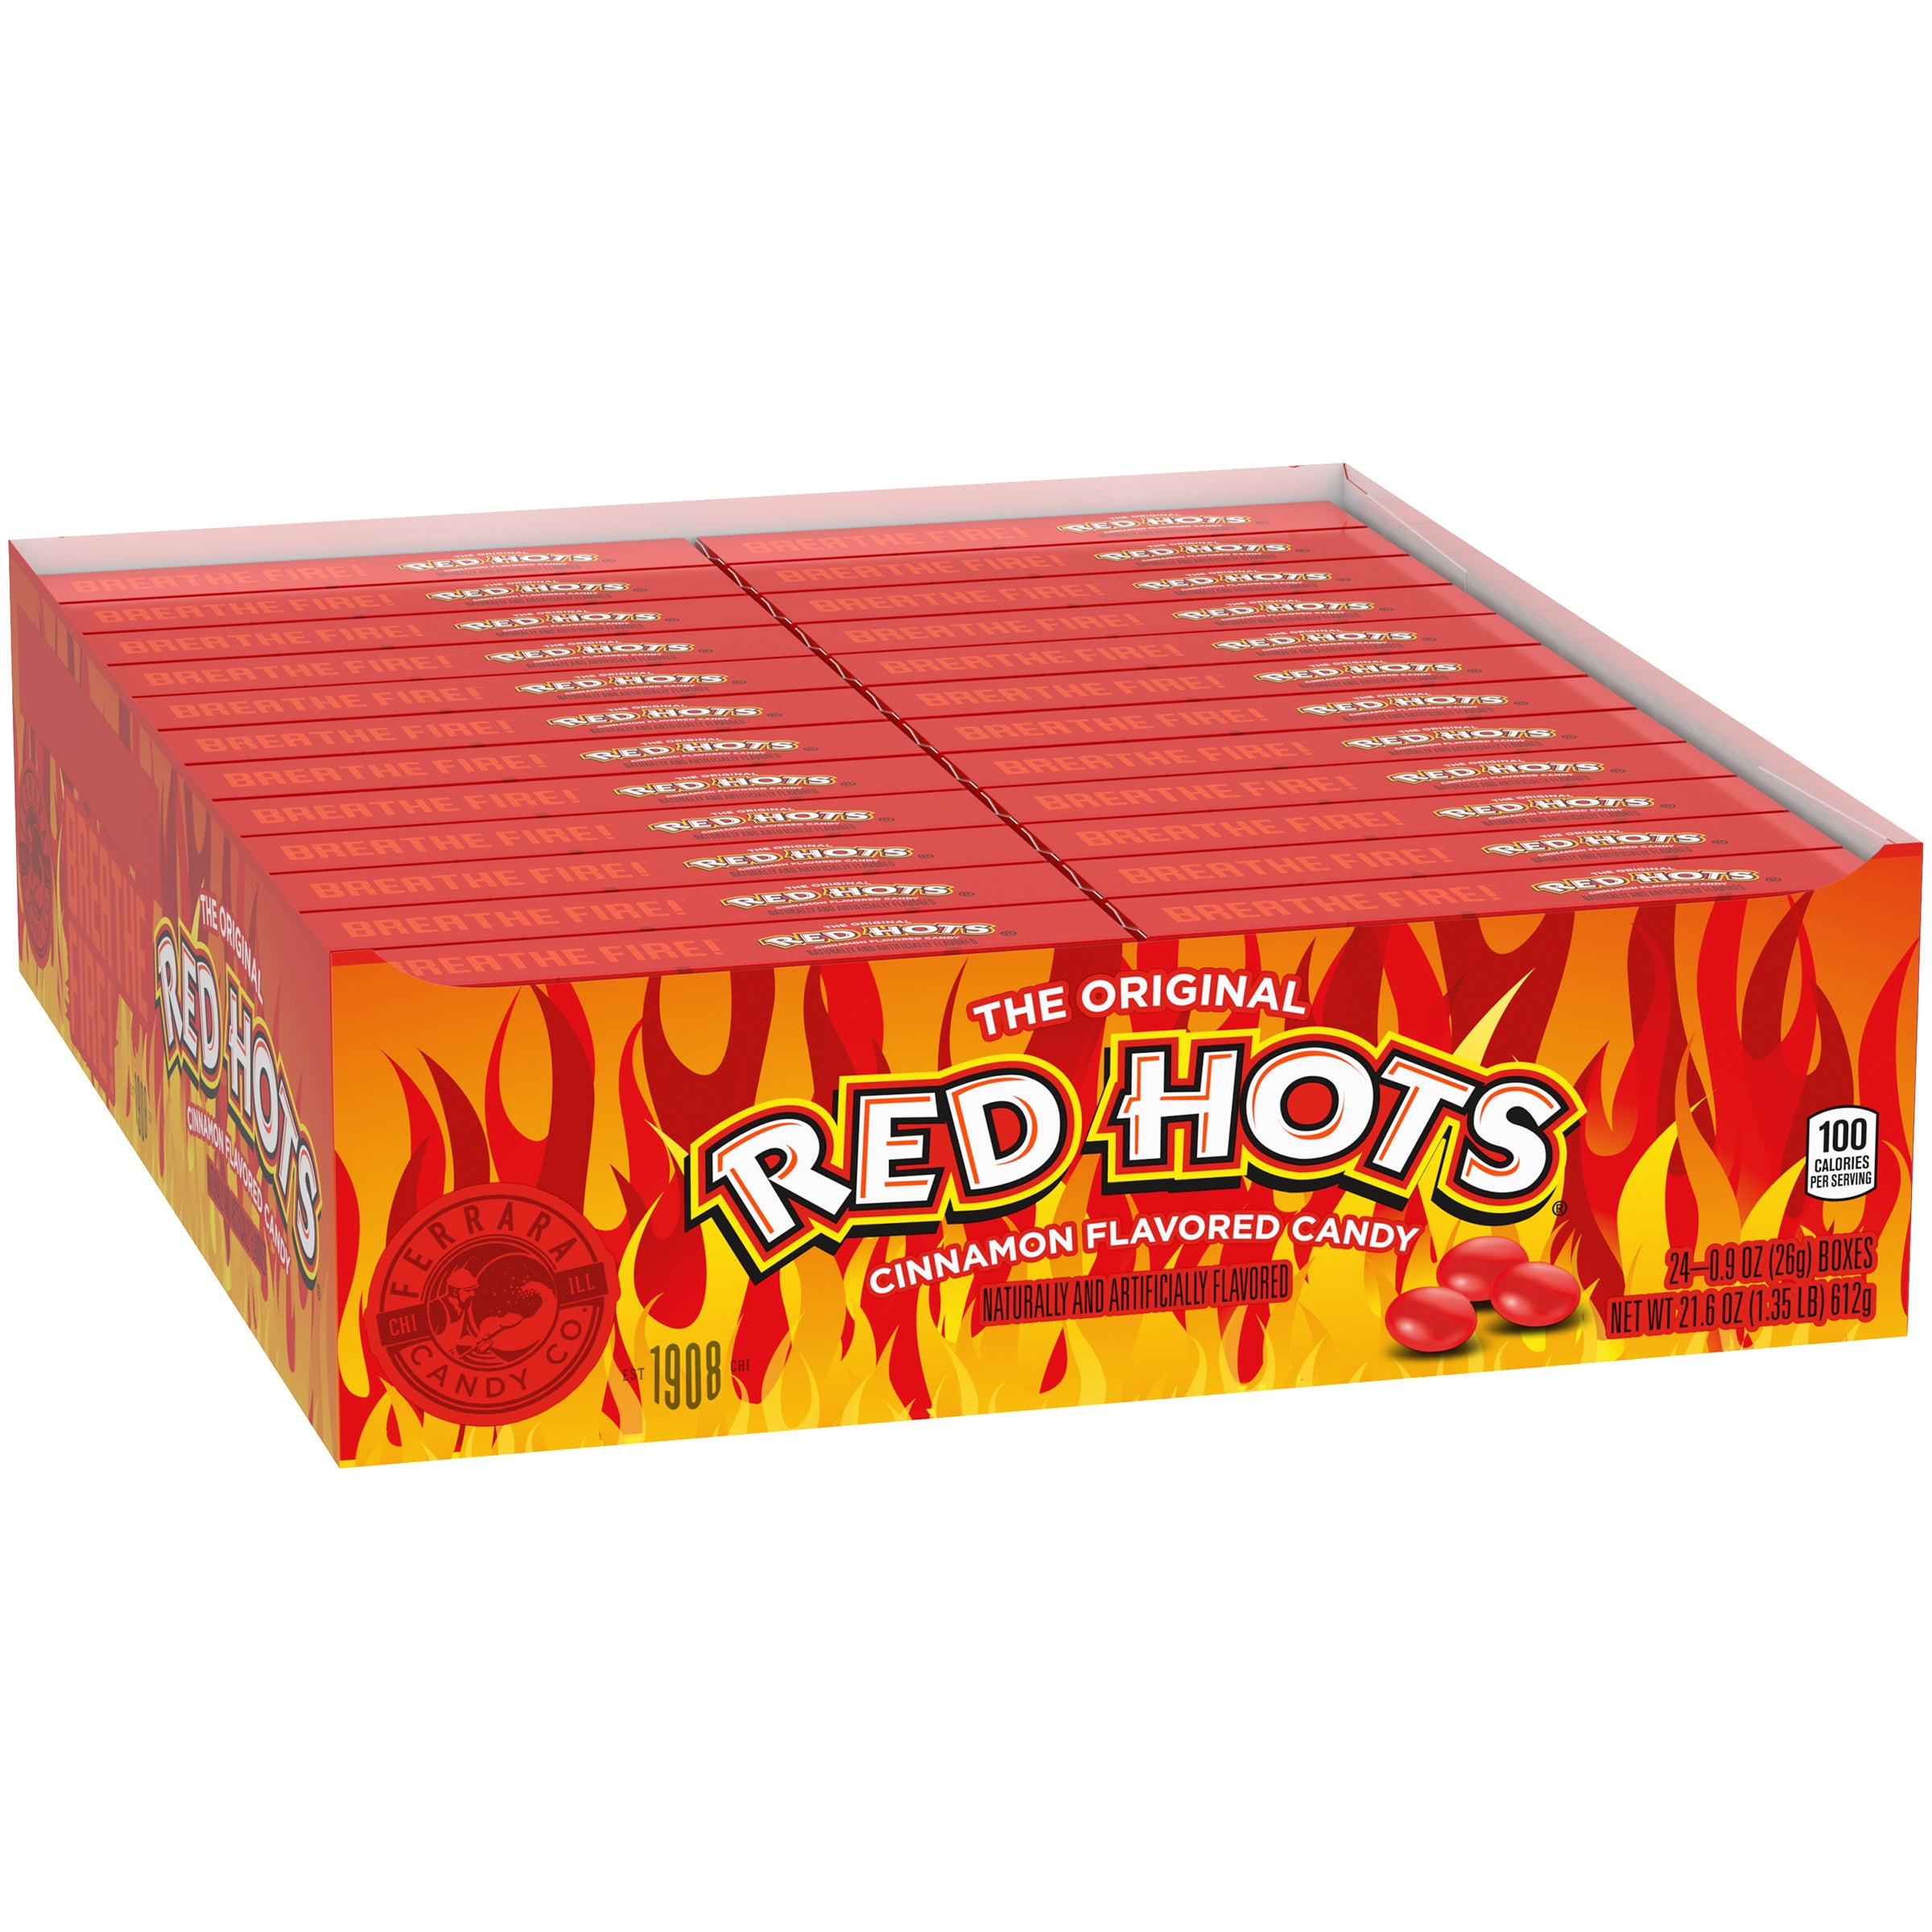 RED HOTS